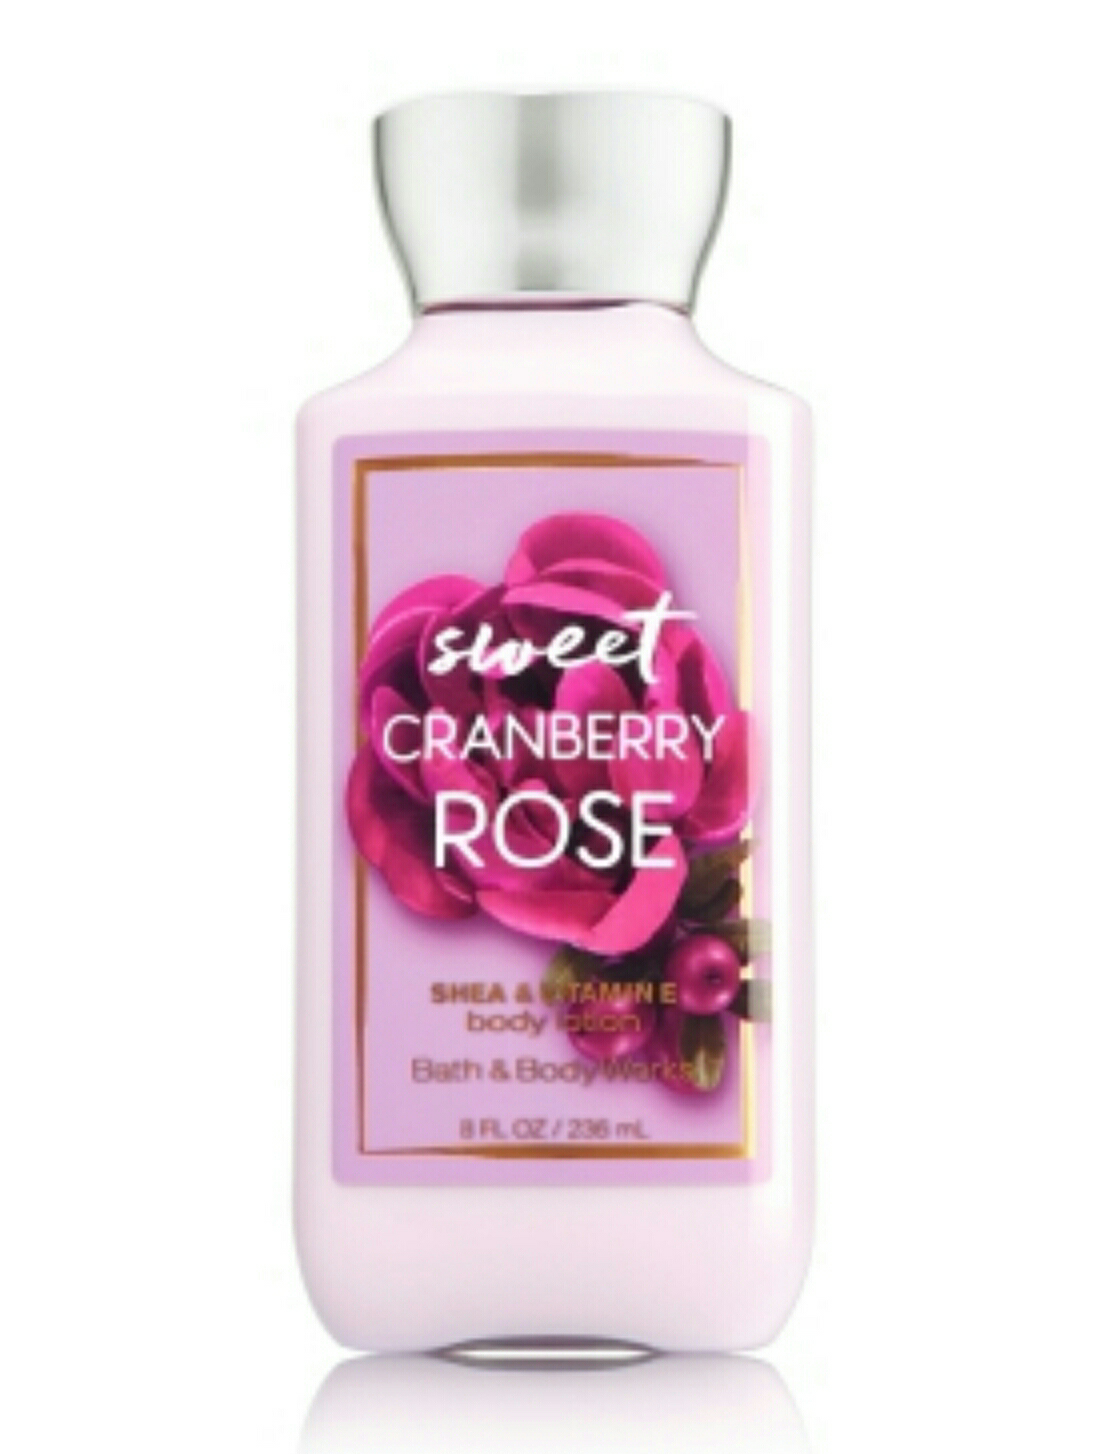 Bath & Body Works Body Lotion SWEET CRANBERRY ROSE